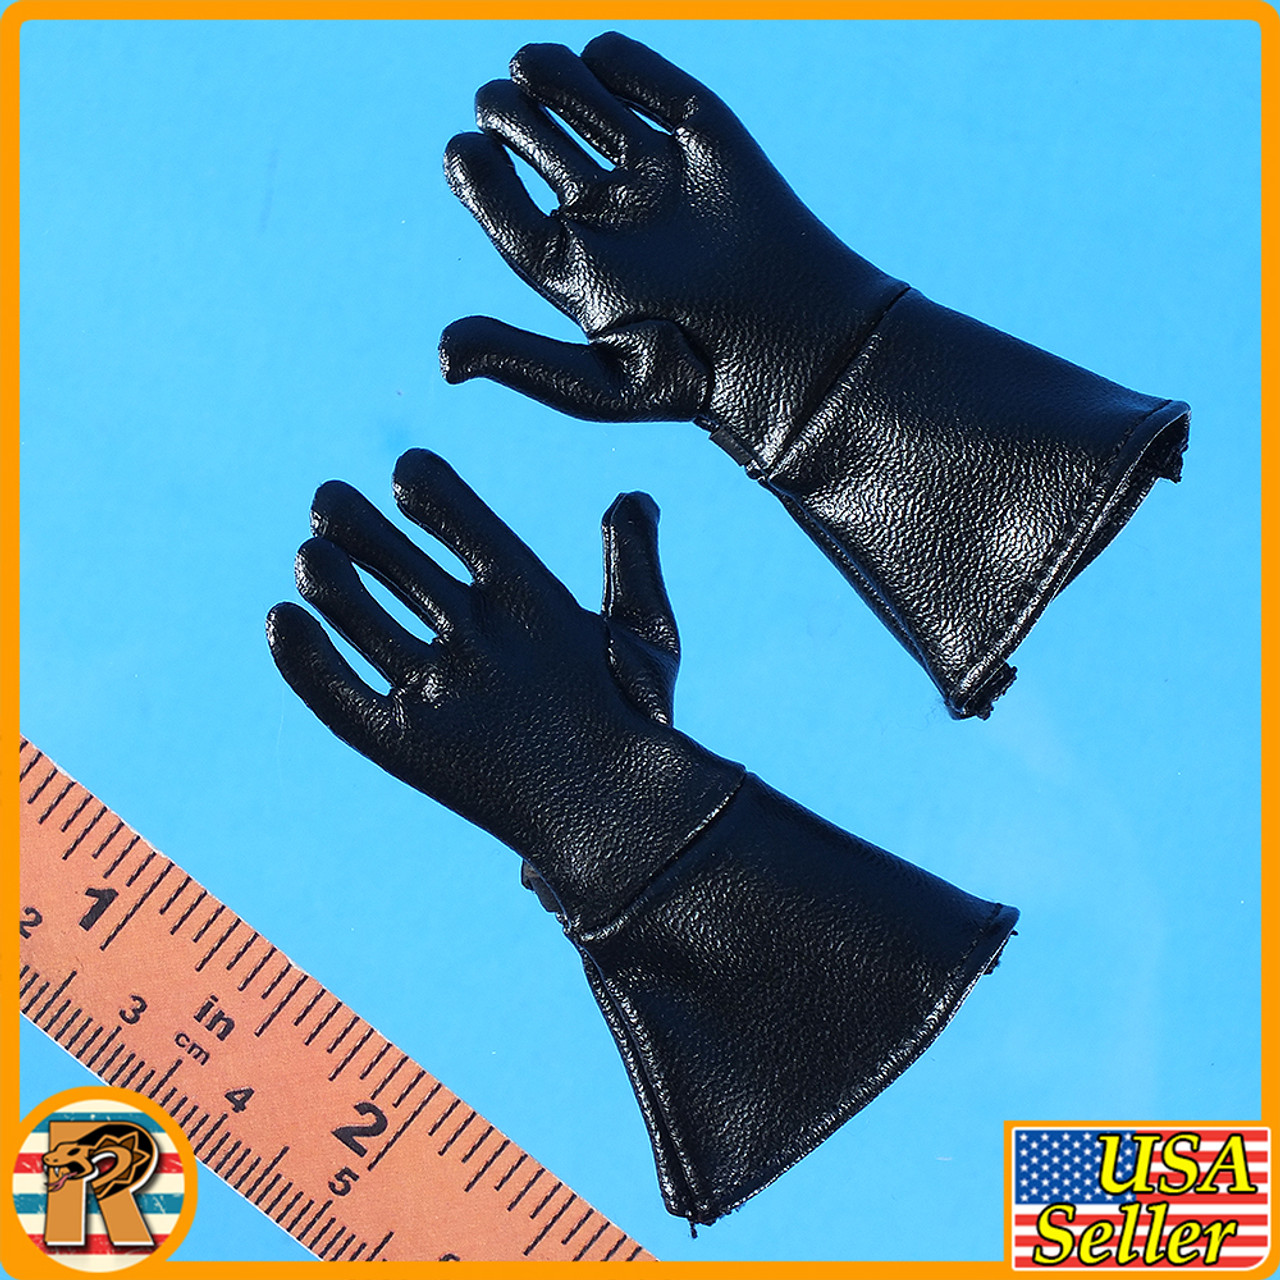 WWII Soviet Ace Pilot - Black Leather Gloves #1 - 1/6 Scale -